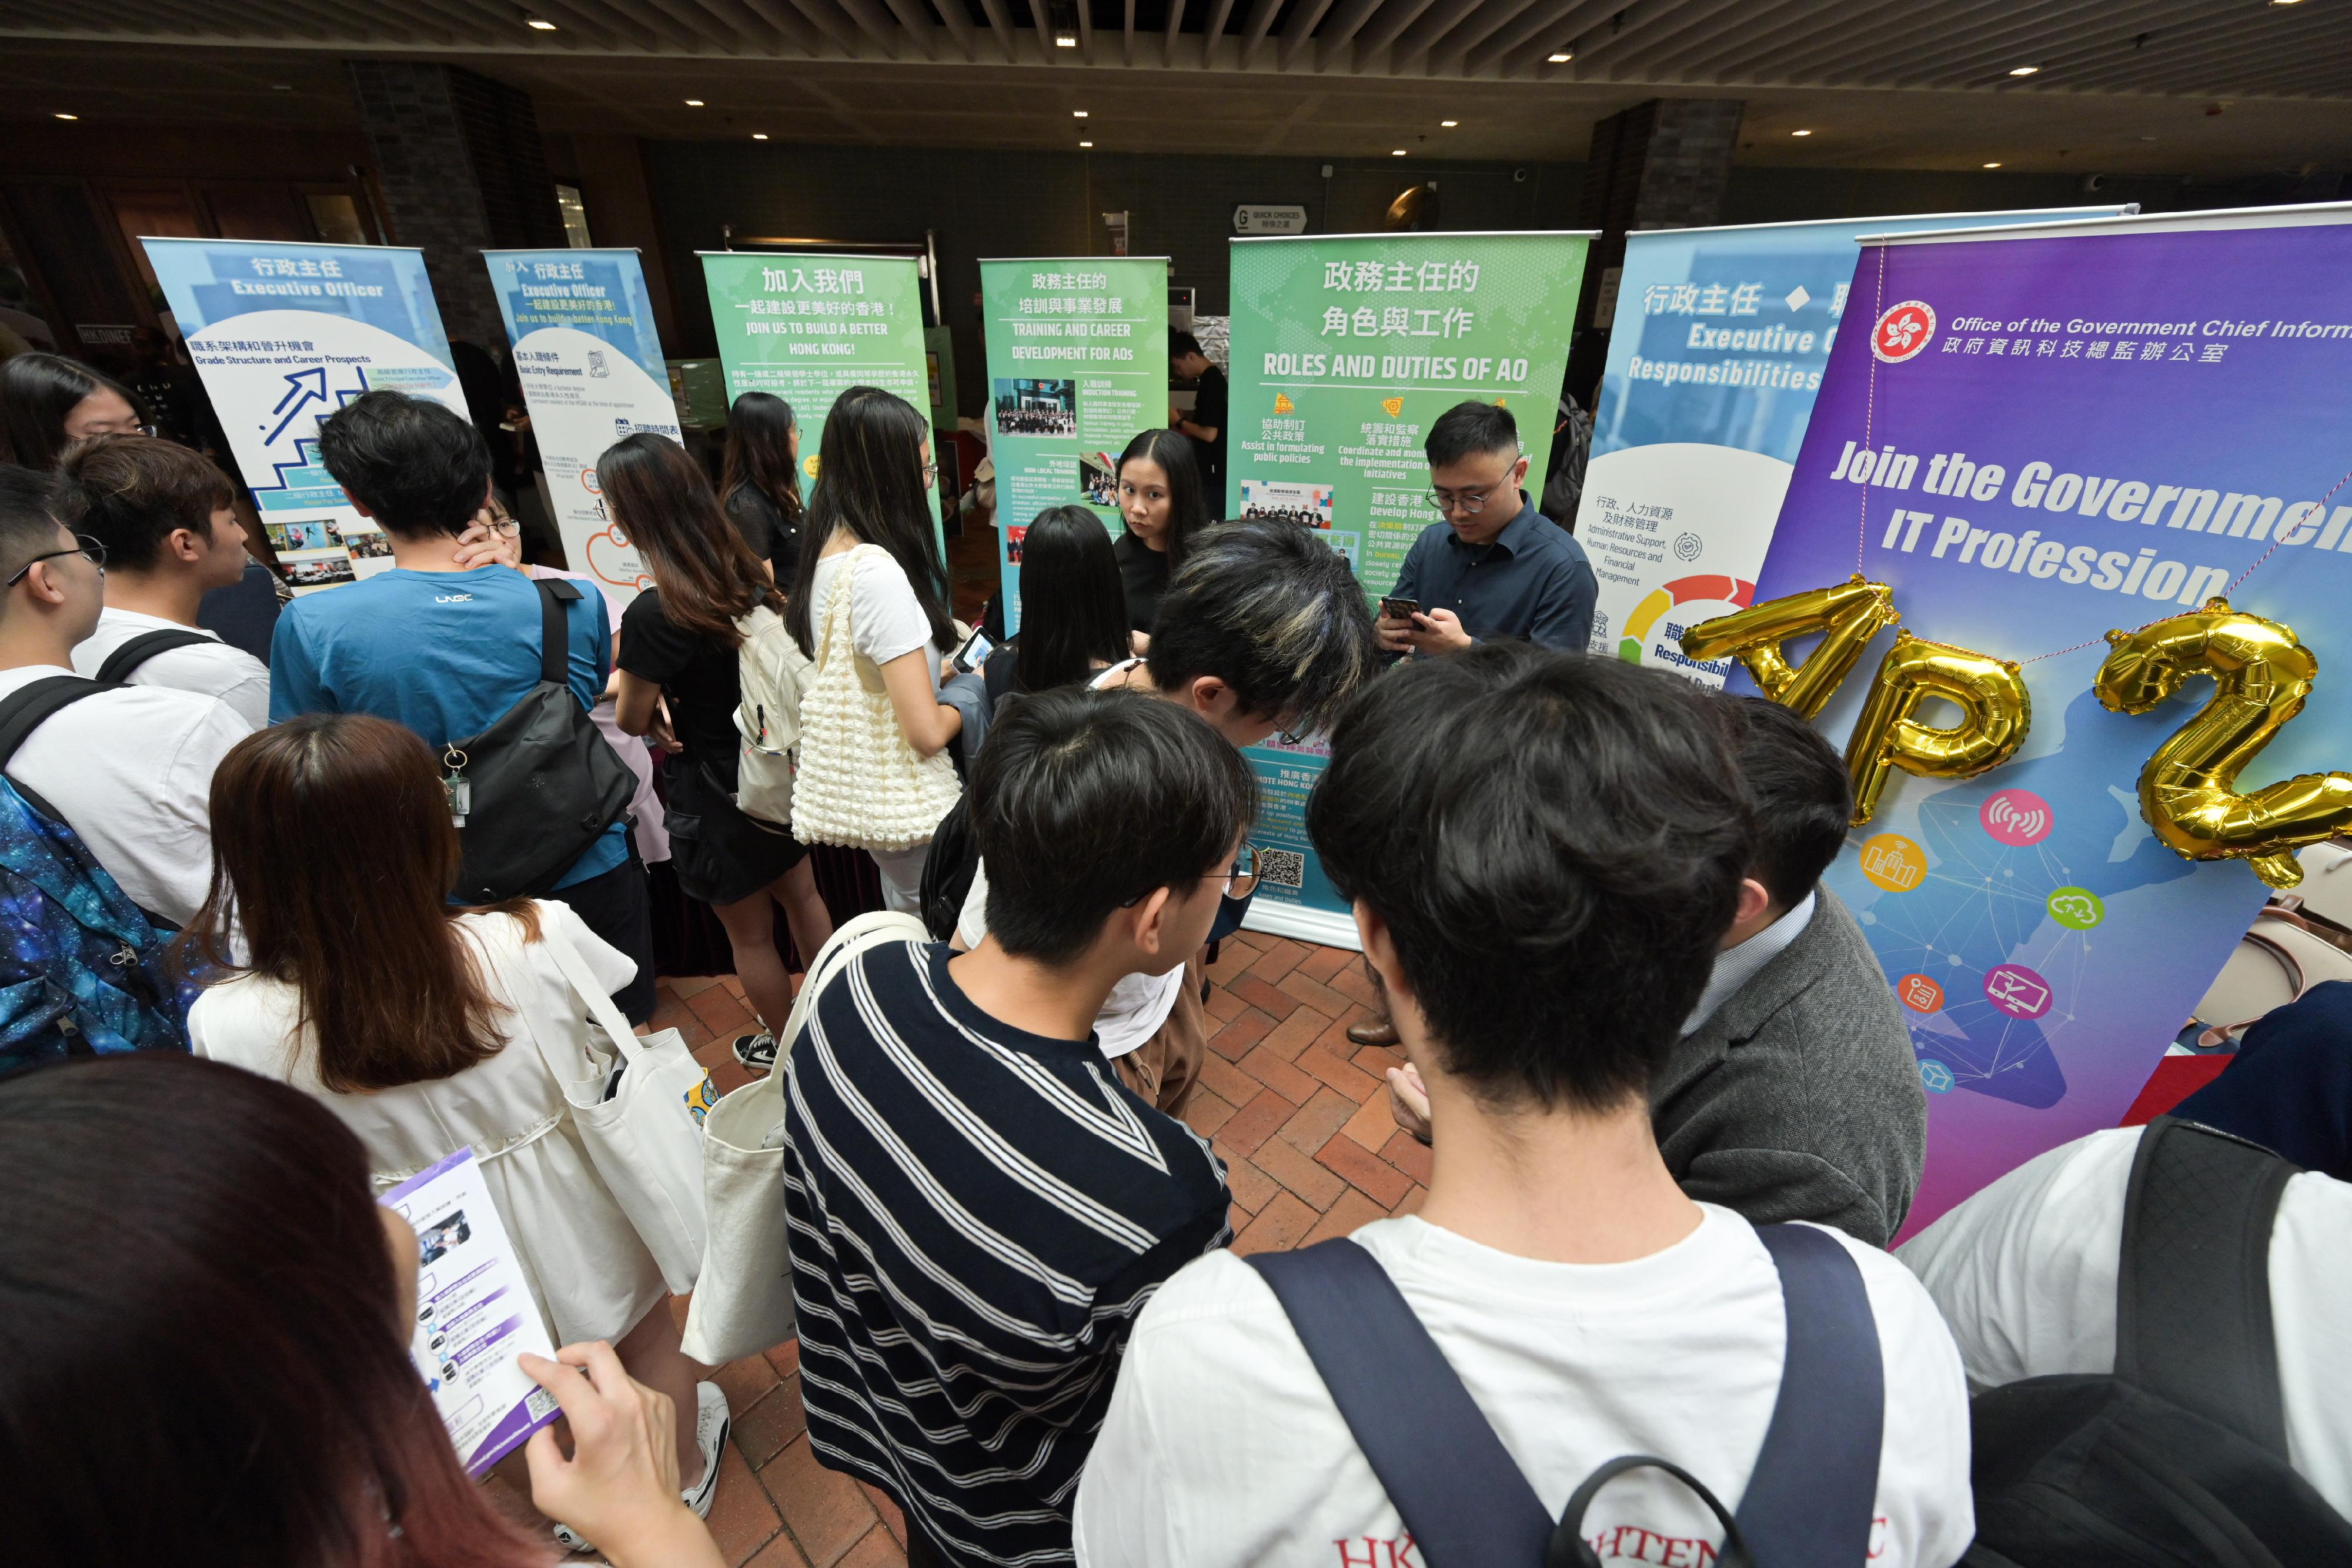 Twenty-one bureaux and departments took part in the Government Career Fair being held today (September 14) at the campus of the University of Hong Kong to let students learn more about the work of different grades, and consider the various job opportunities offered by the Government.